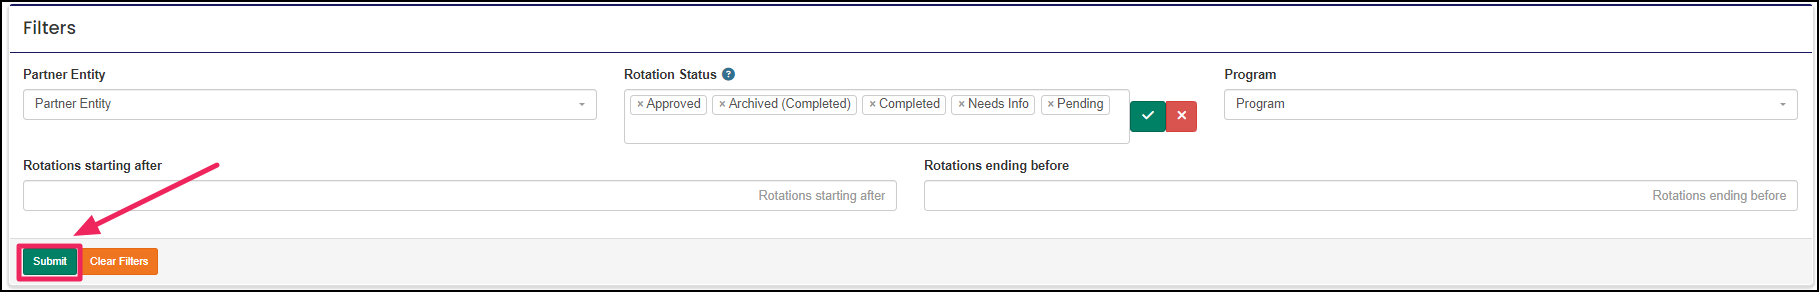 partner rotation report highlighting submit button